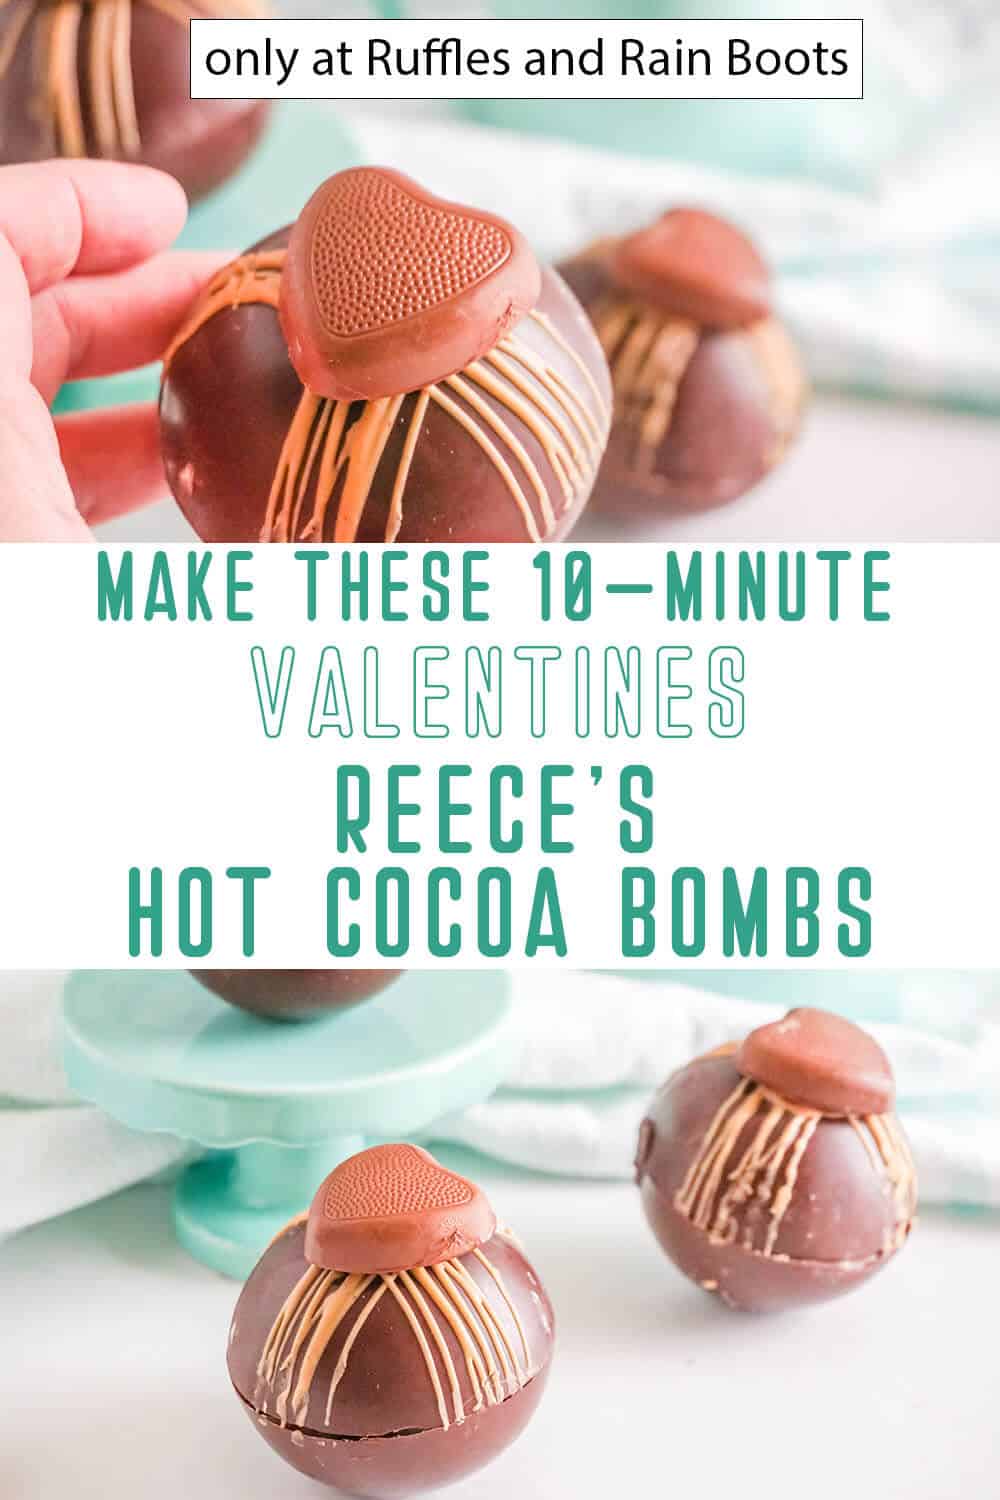 photo collage of reeces peanut butter valentines hot cocoa bomb recipe with text which reads make these 10-minute valentines reece's hot cocoa bombs